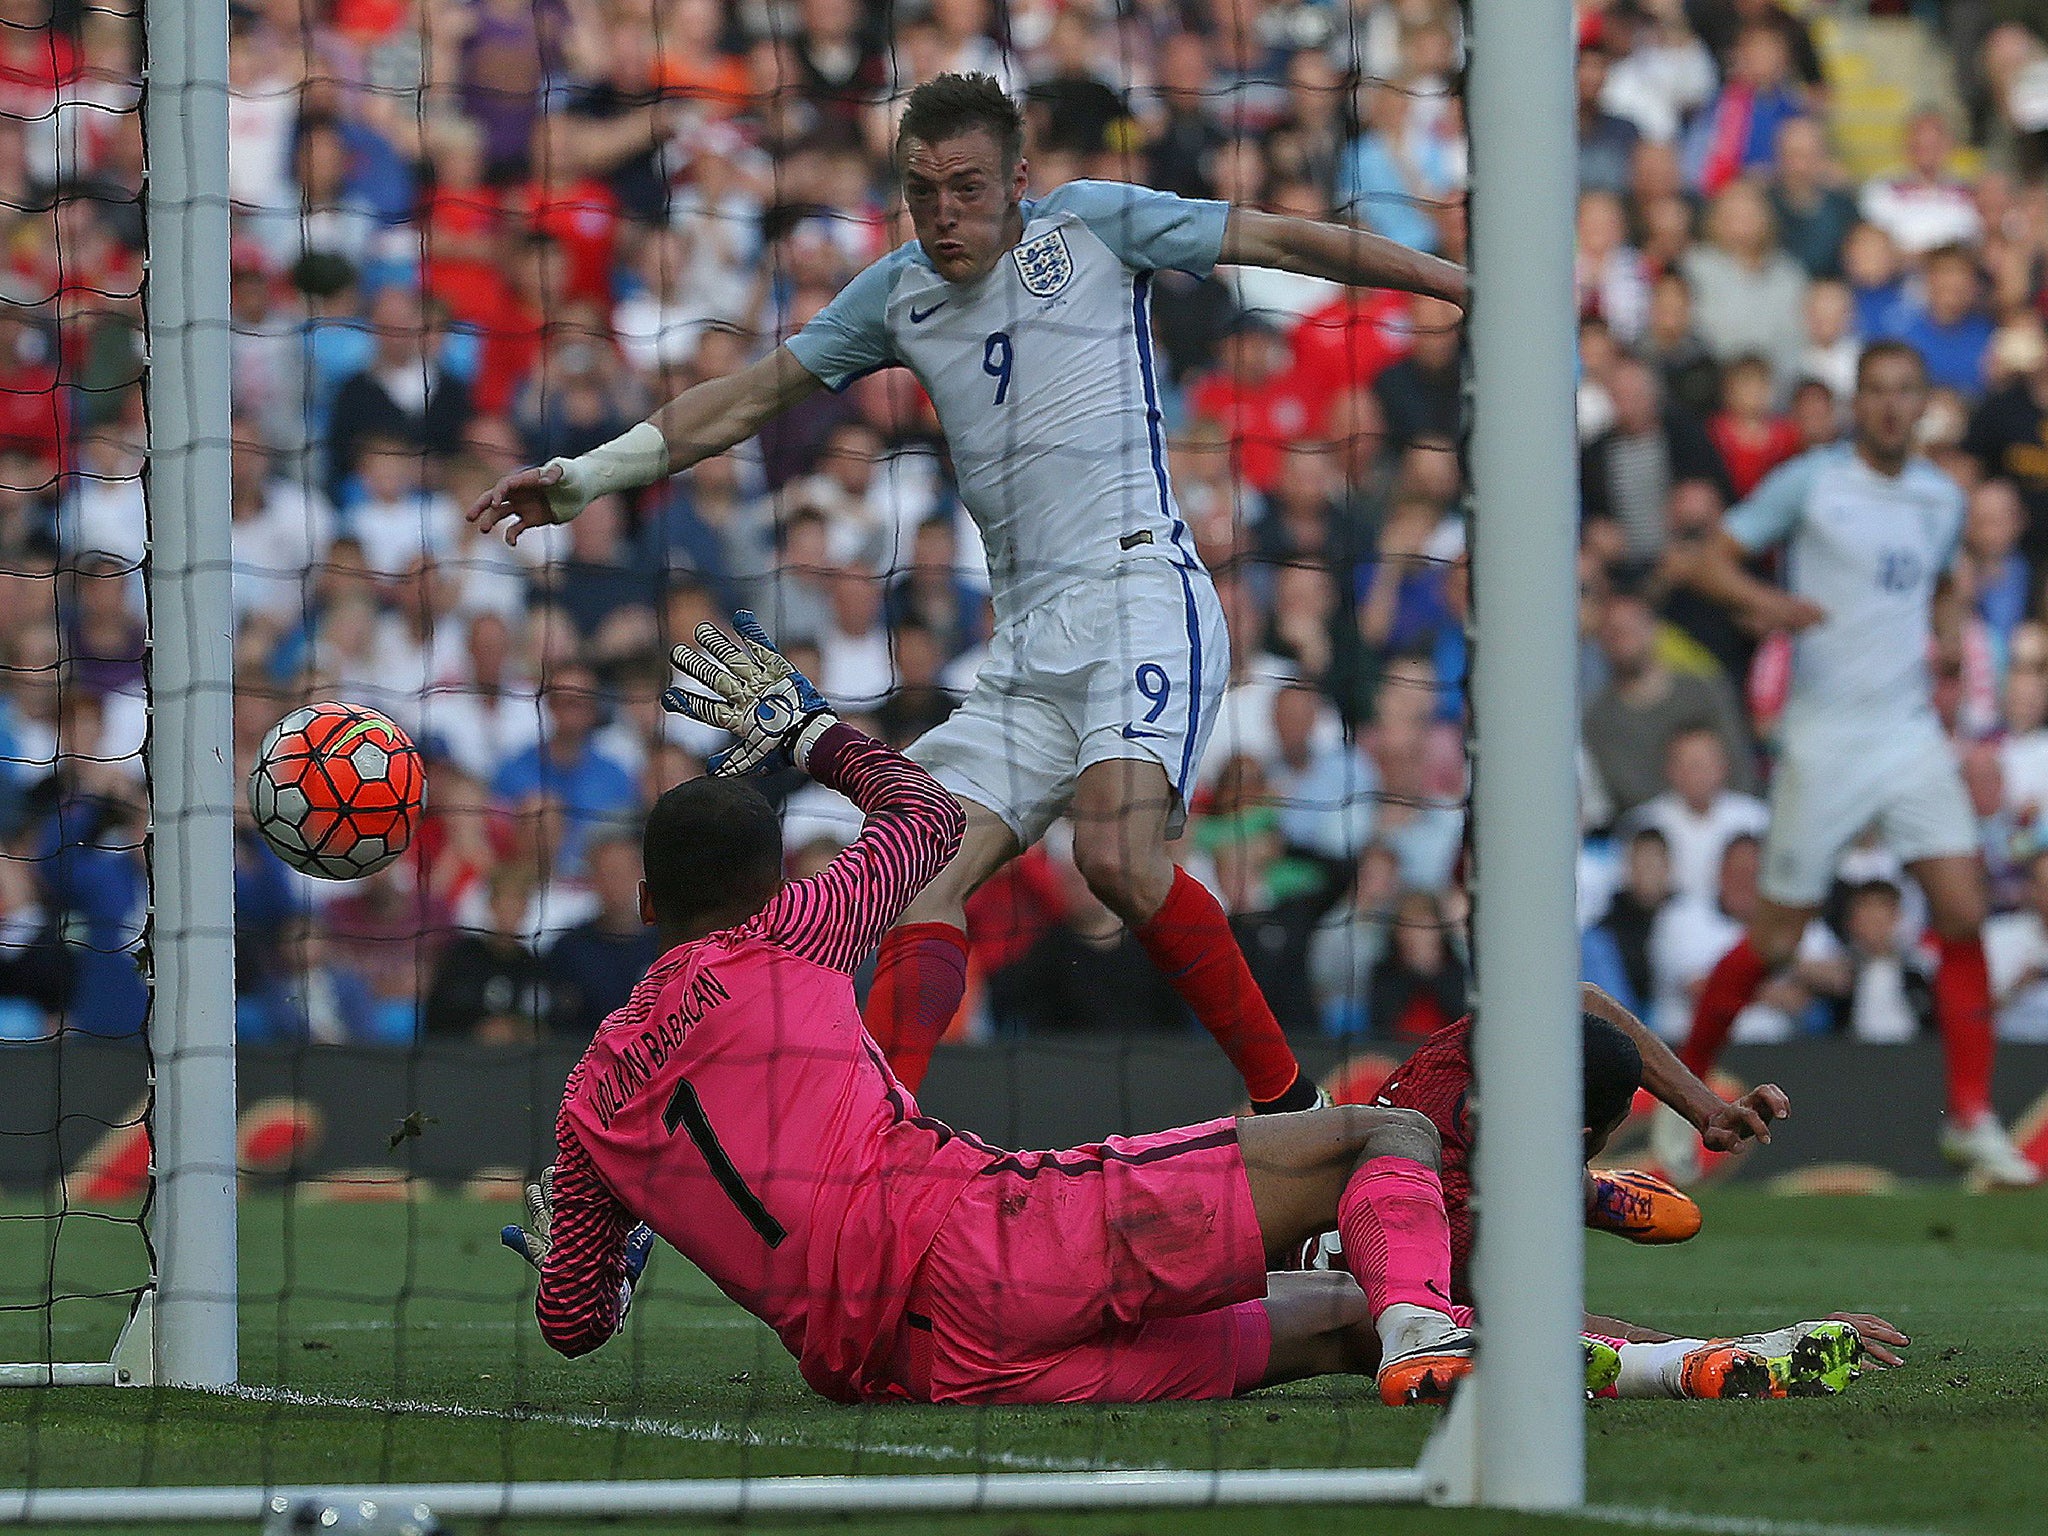 Vardy thumped home from yards out late on